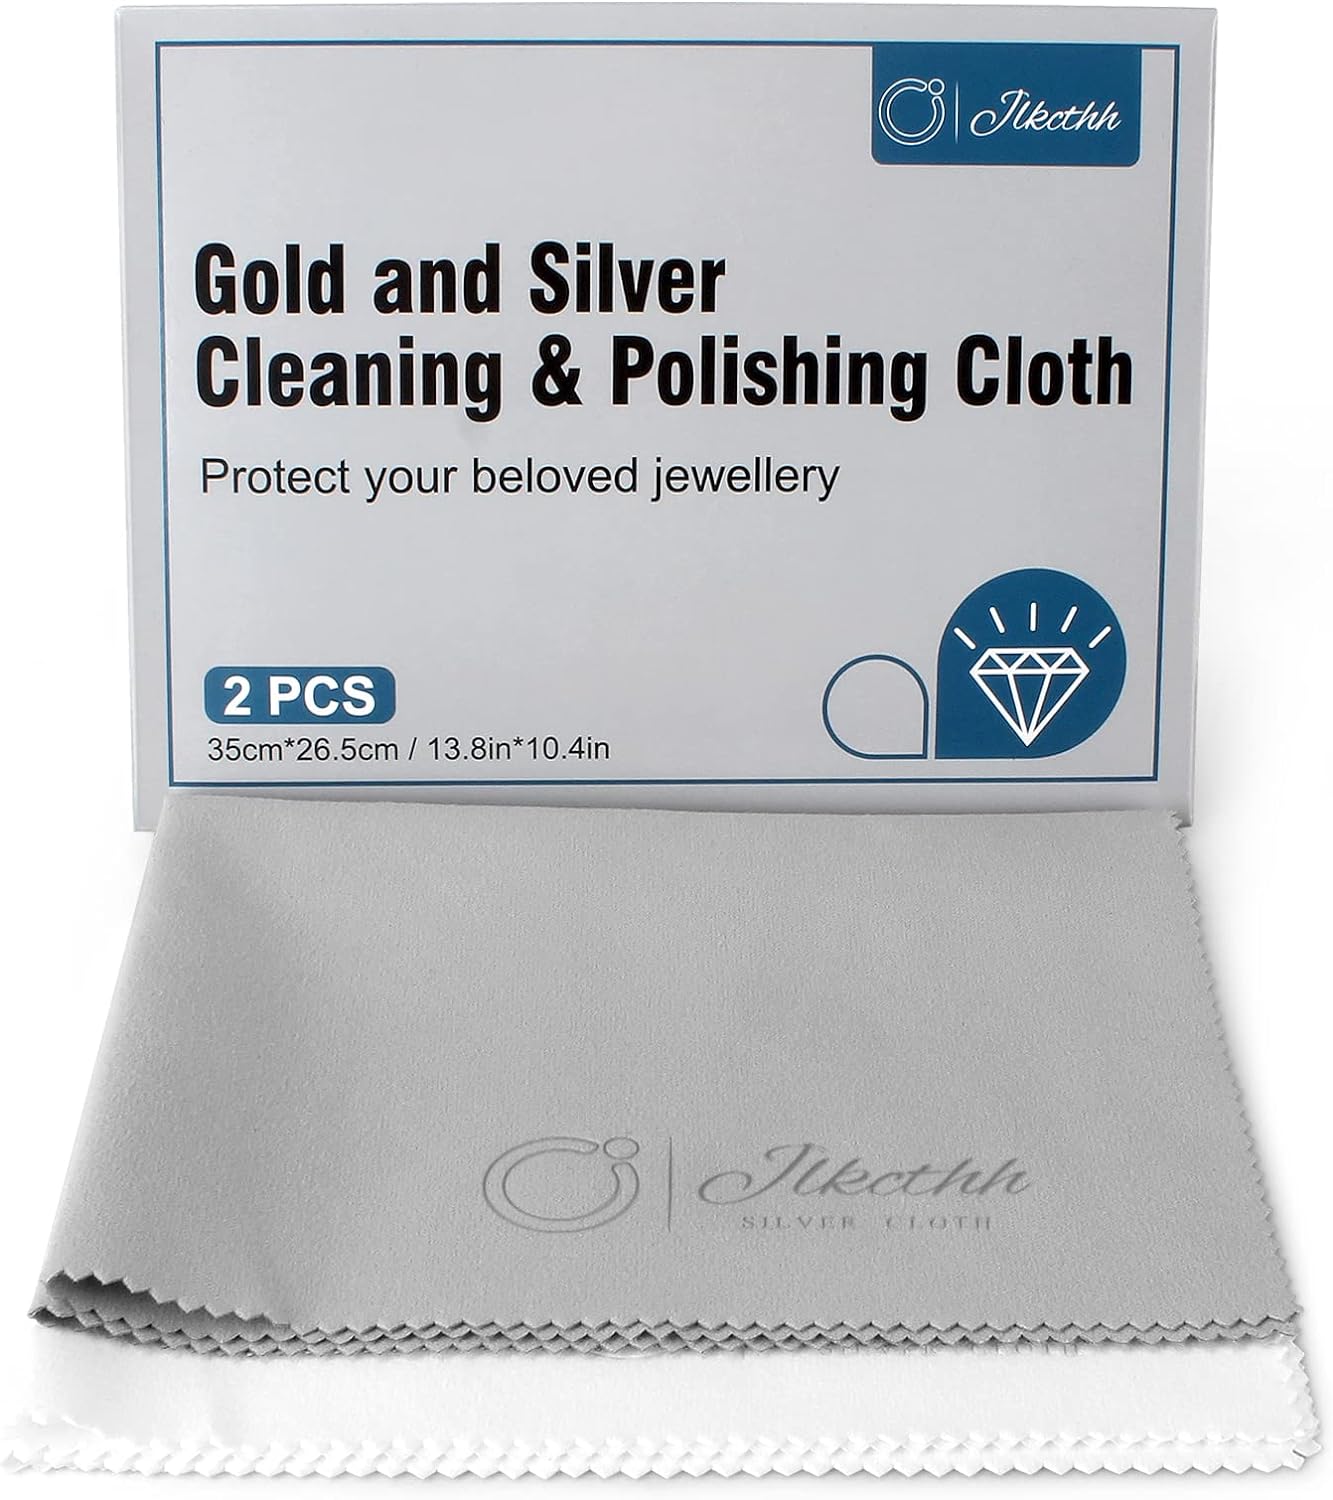 Treated Jewelry Polishing Cloth - 9x11 inch Anti Tarnish and Cleaning  Combined